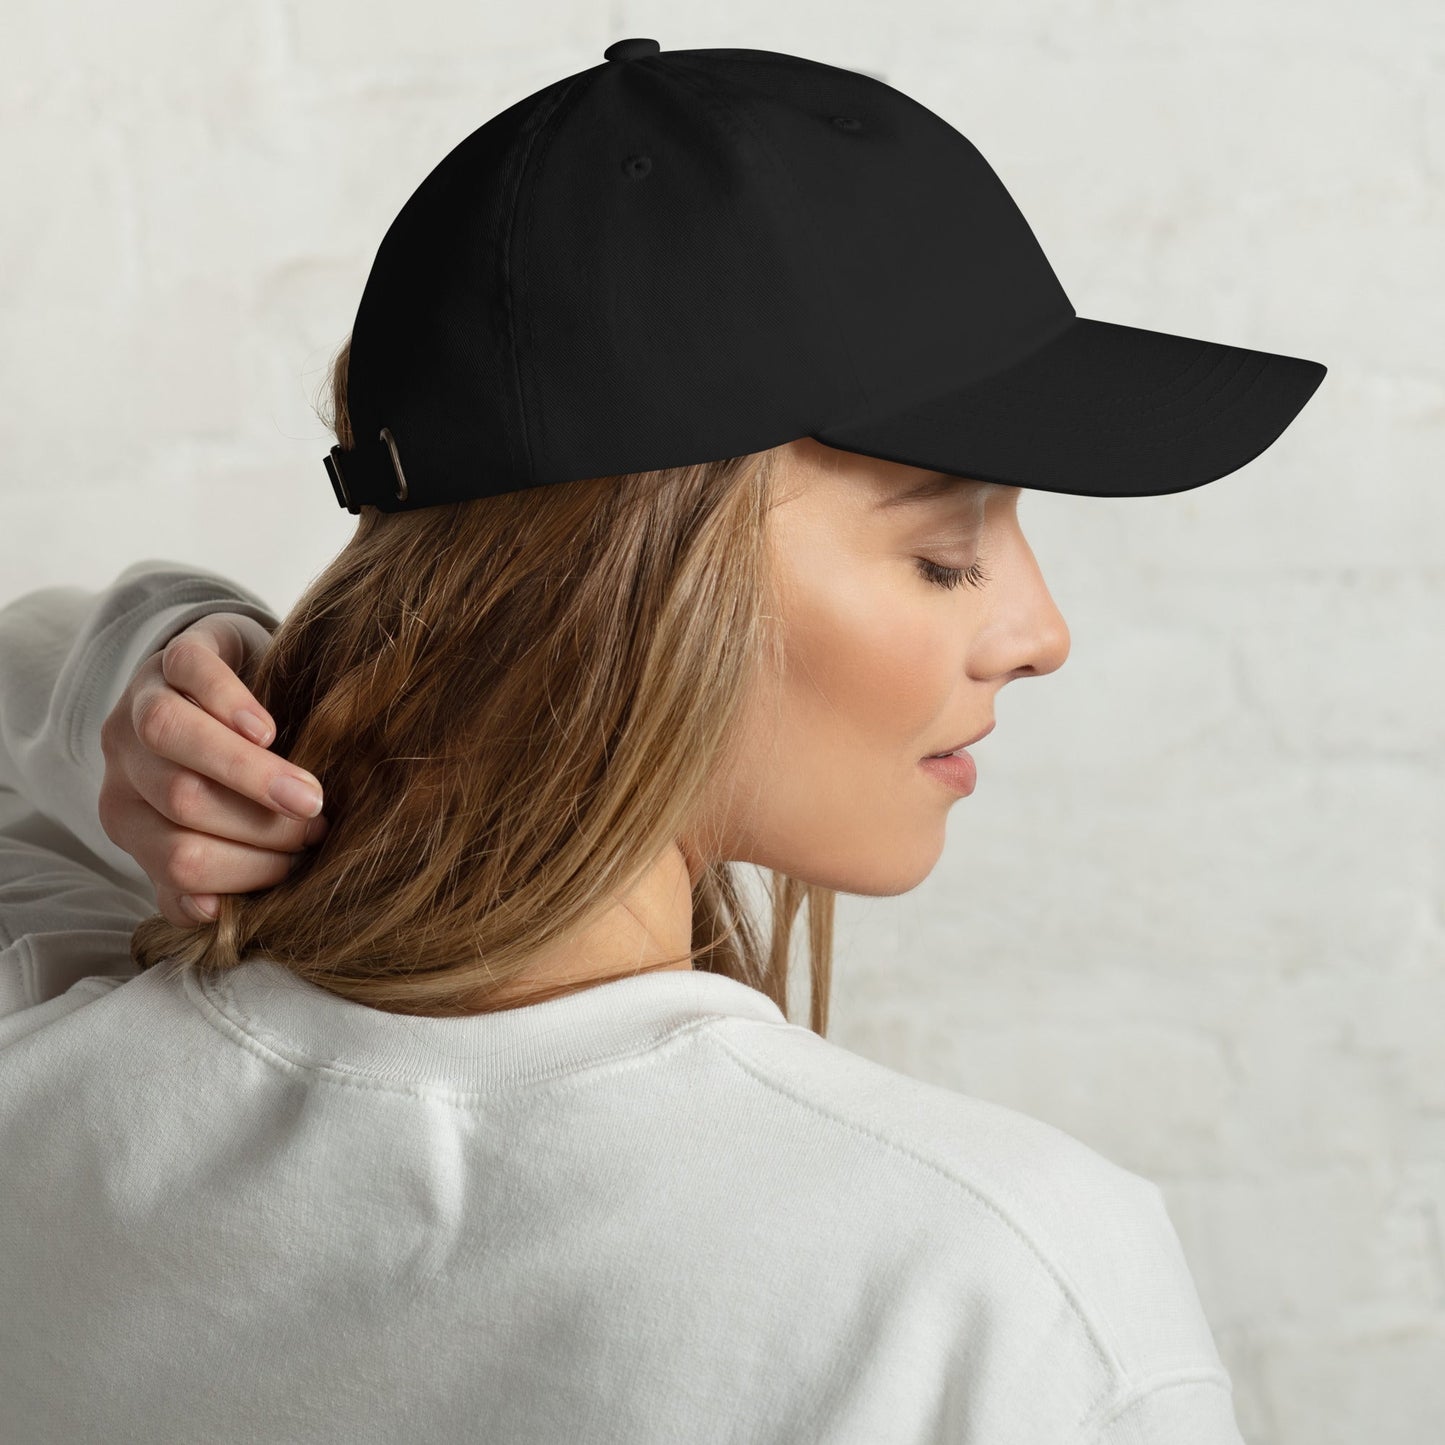 VitClear embroidered Dad Hat - VitClear